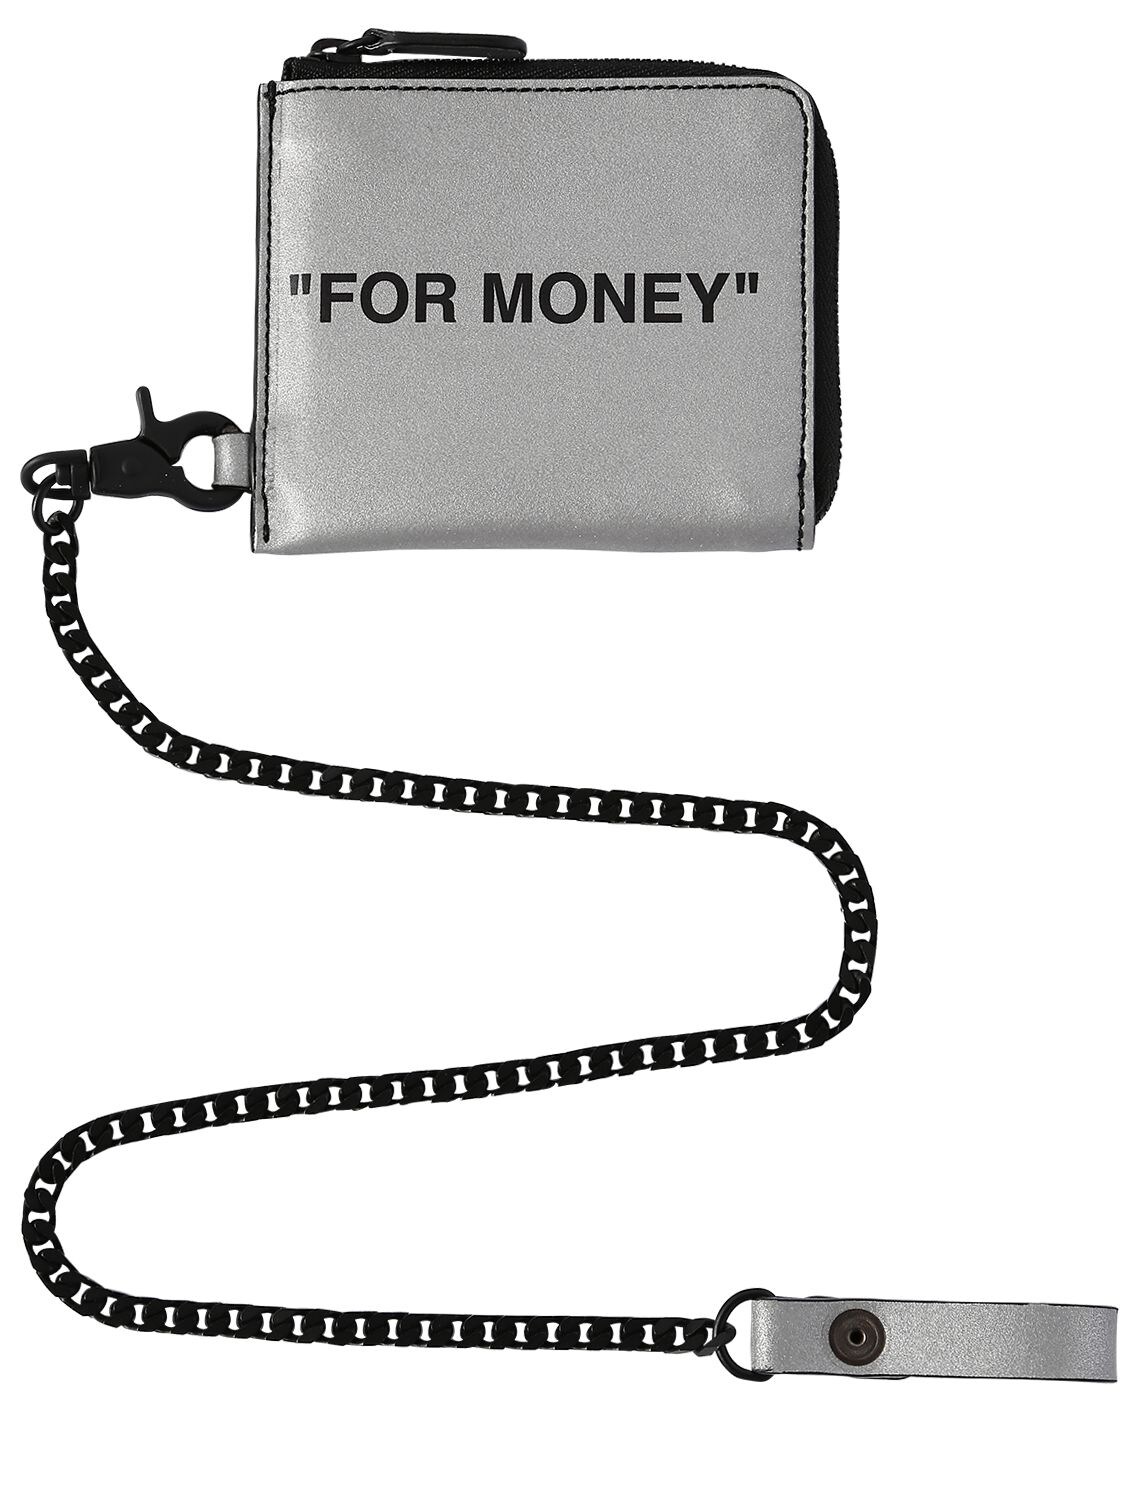 OFF-WHITE REFLECTIVE "FOR MONEY" CHAIN WALLET,71IJSX031-OTEXMA2